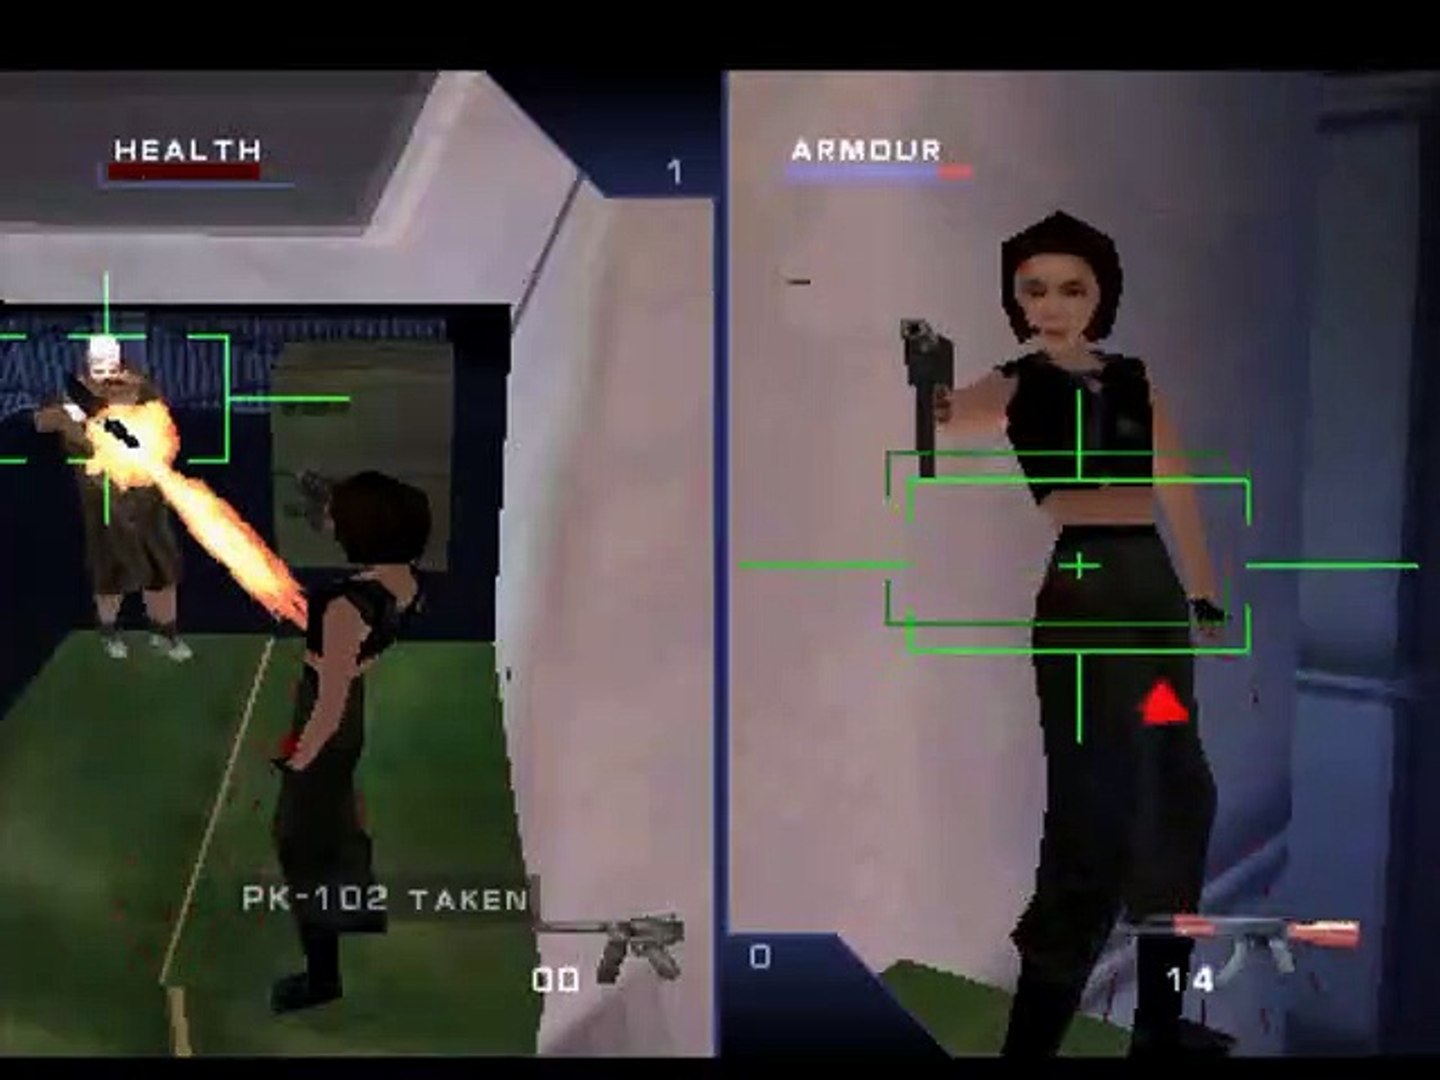 Syphon Filter 3 online multiplayer - psx - Vidéo Dailymotion